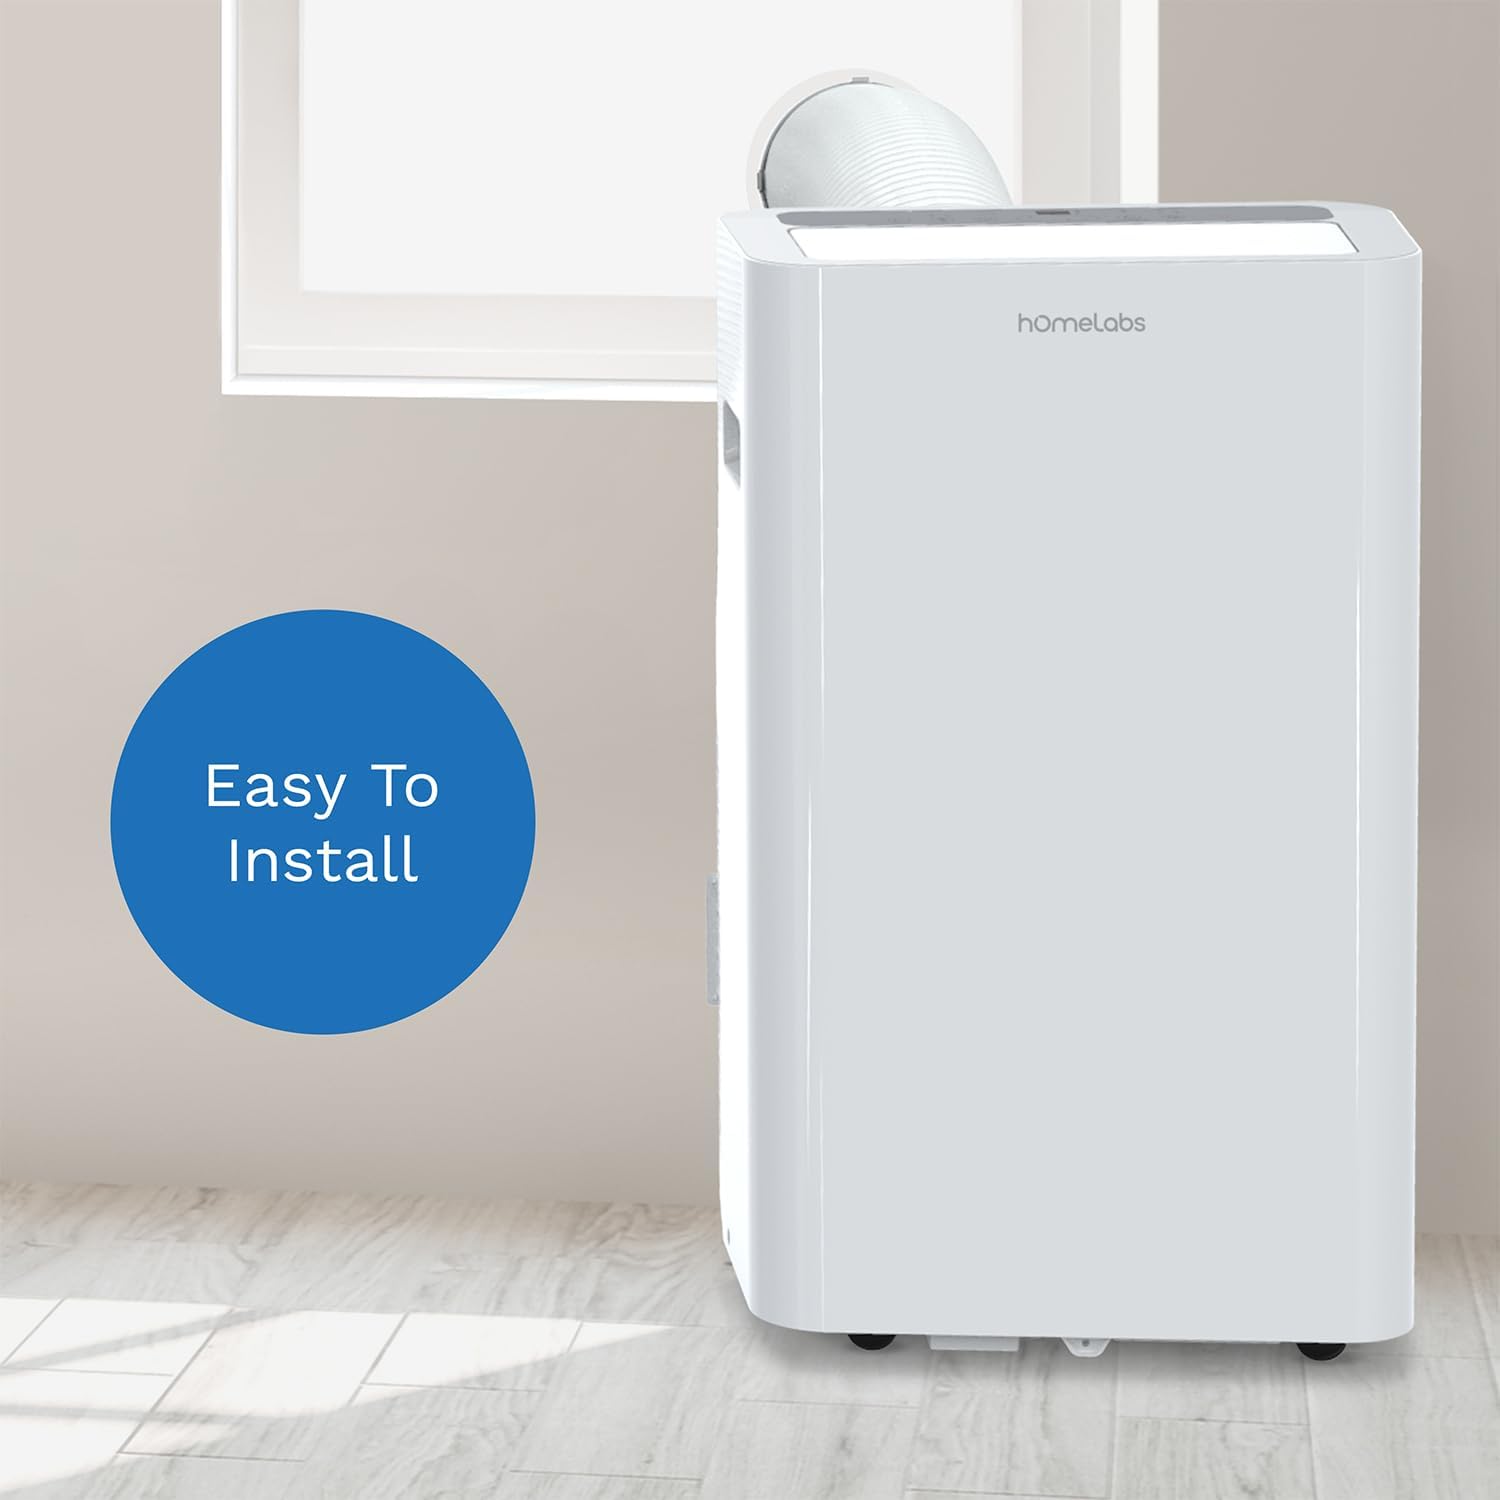 hOmeLabs 12000 BTU Portable Air Conditioner (new CEC 8000 BTU) - Quiet AC Unit Cools Rooms 300-450 Square Feet - with Wheels, Washable Filter, Remote Control and LED Indicator Lights